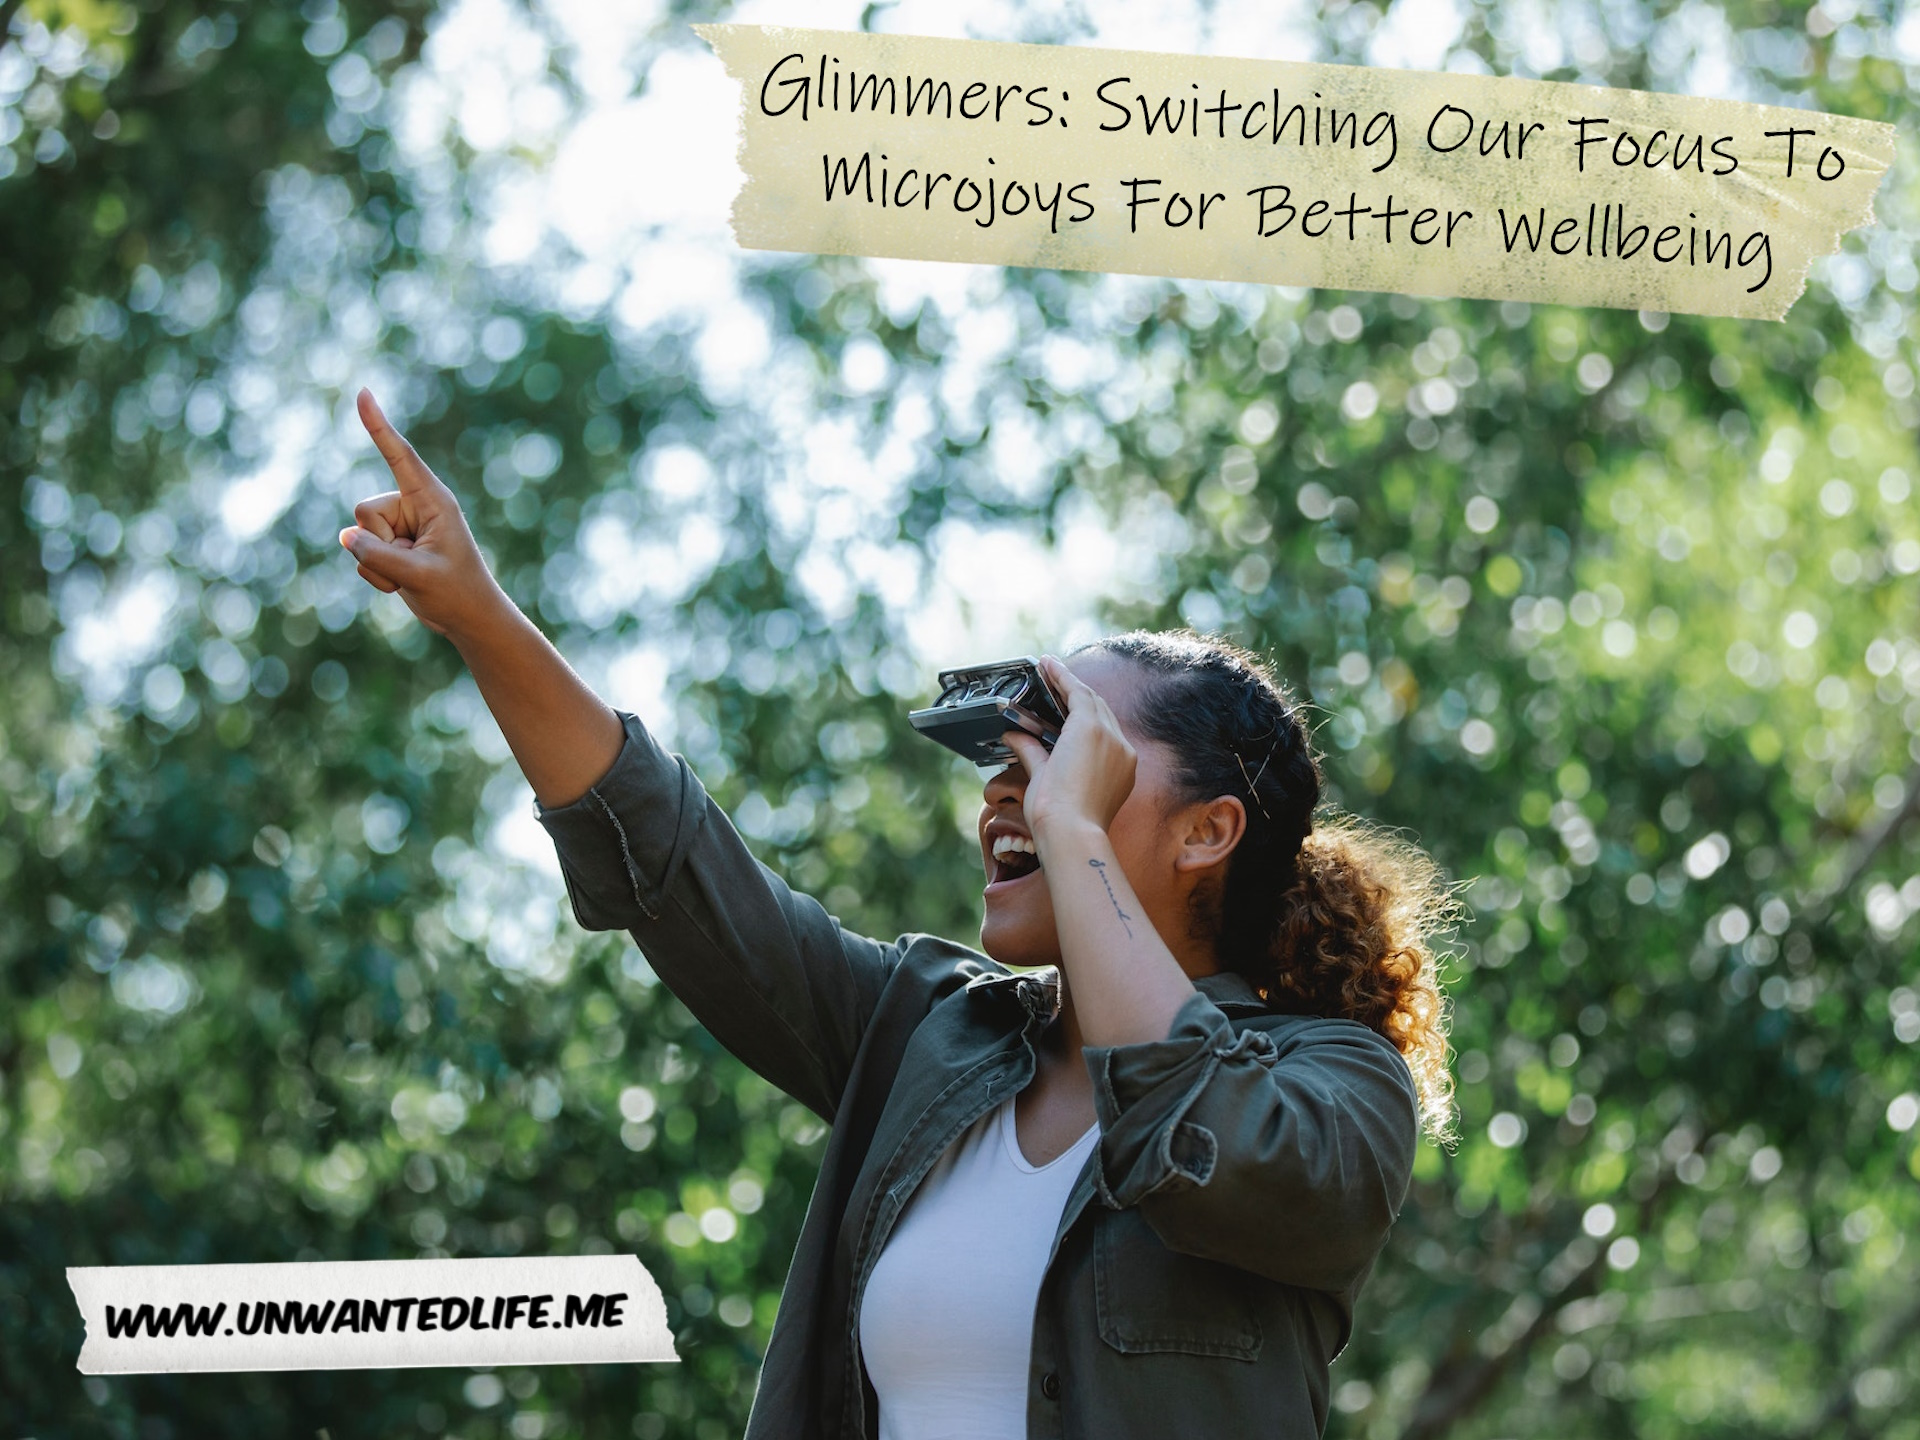 A Black woman looking through a small set of binoculars, smiling, and pointing to represent the topic of the article - Glimmers: Switching Our Focus To Microjoys For Better Wellbeing